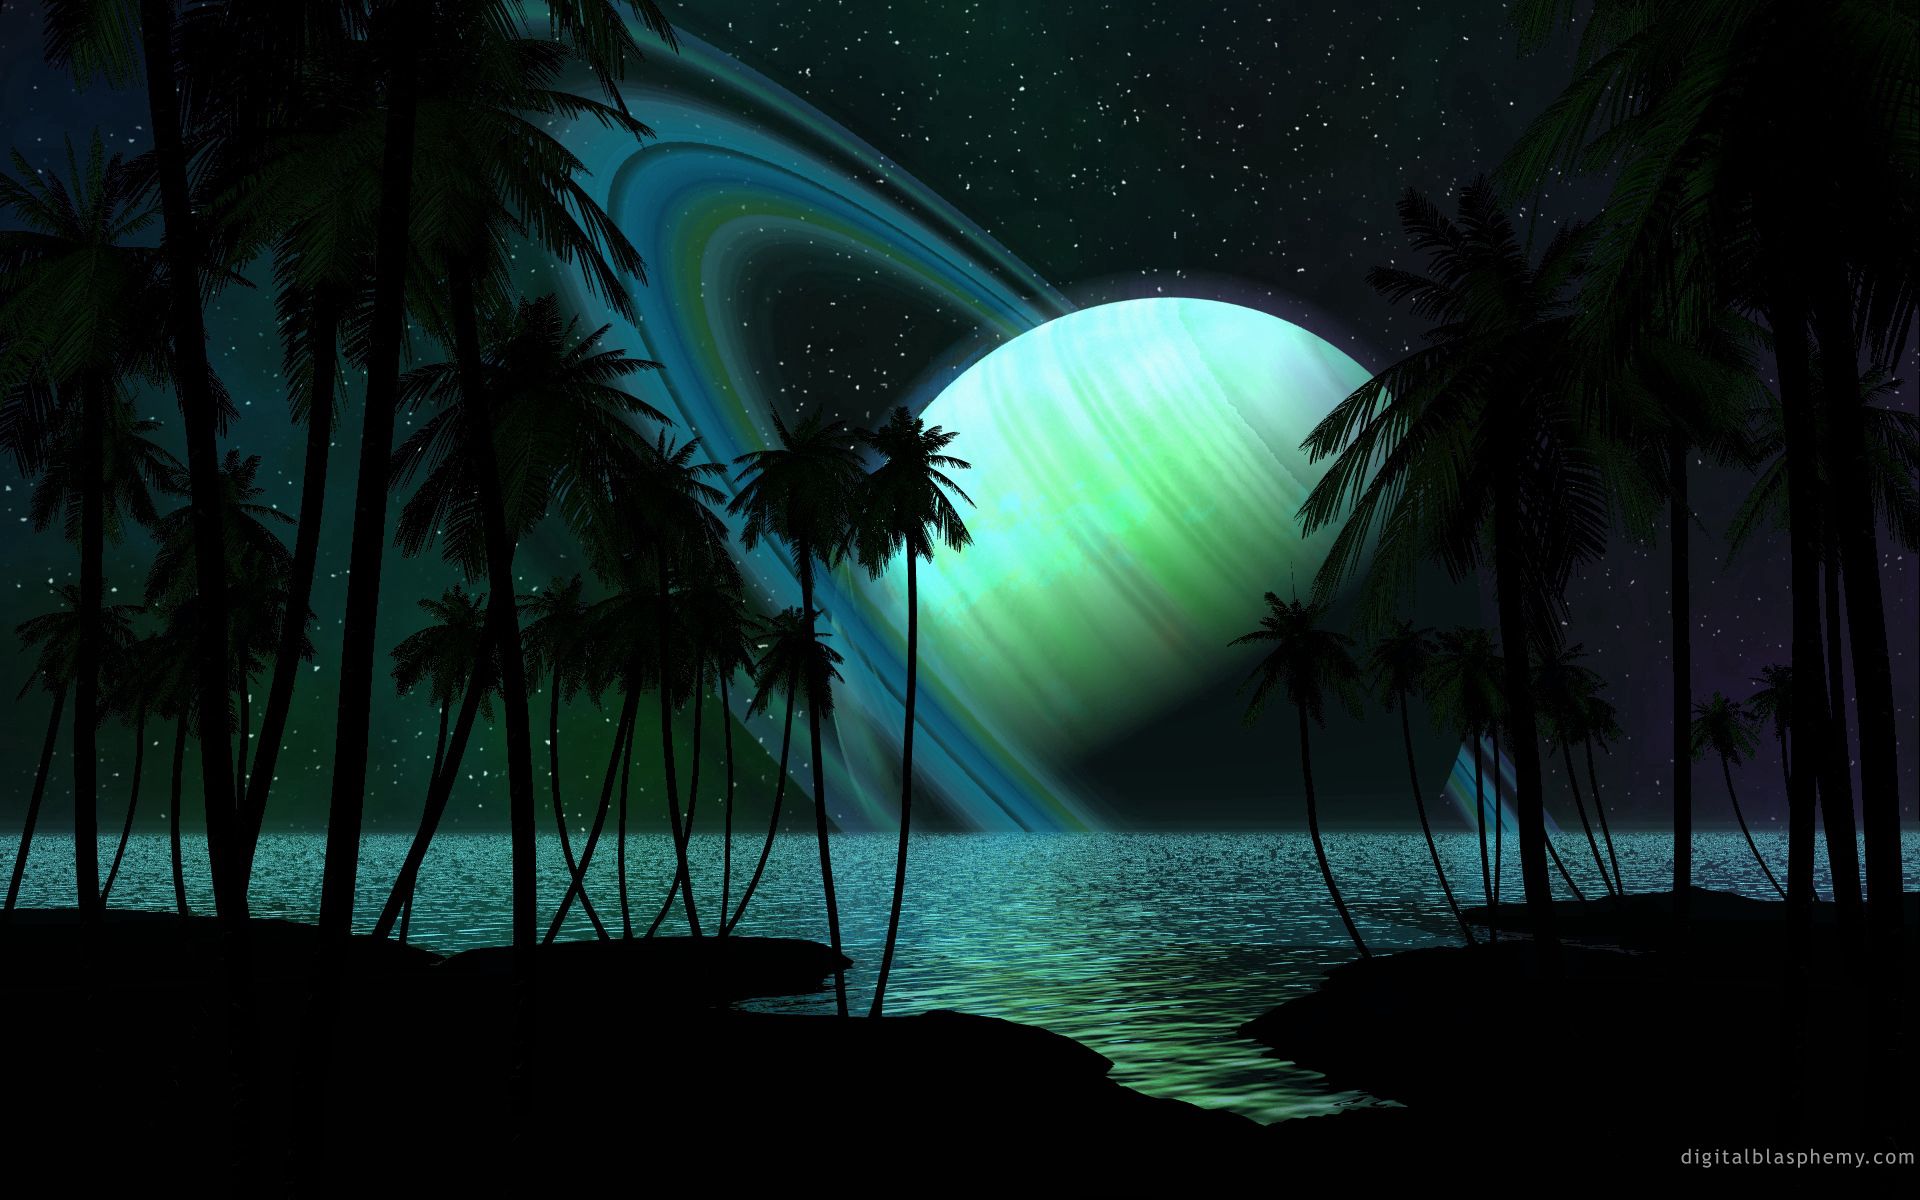 universe, saturn, water, palms, darkness, fiction, that's incredible cellphone